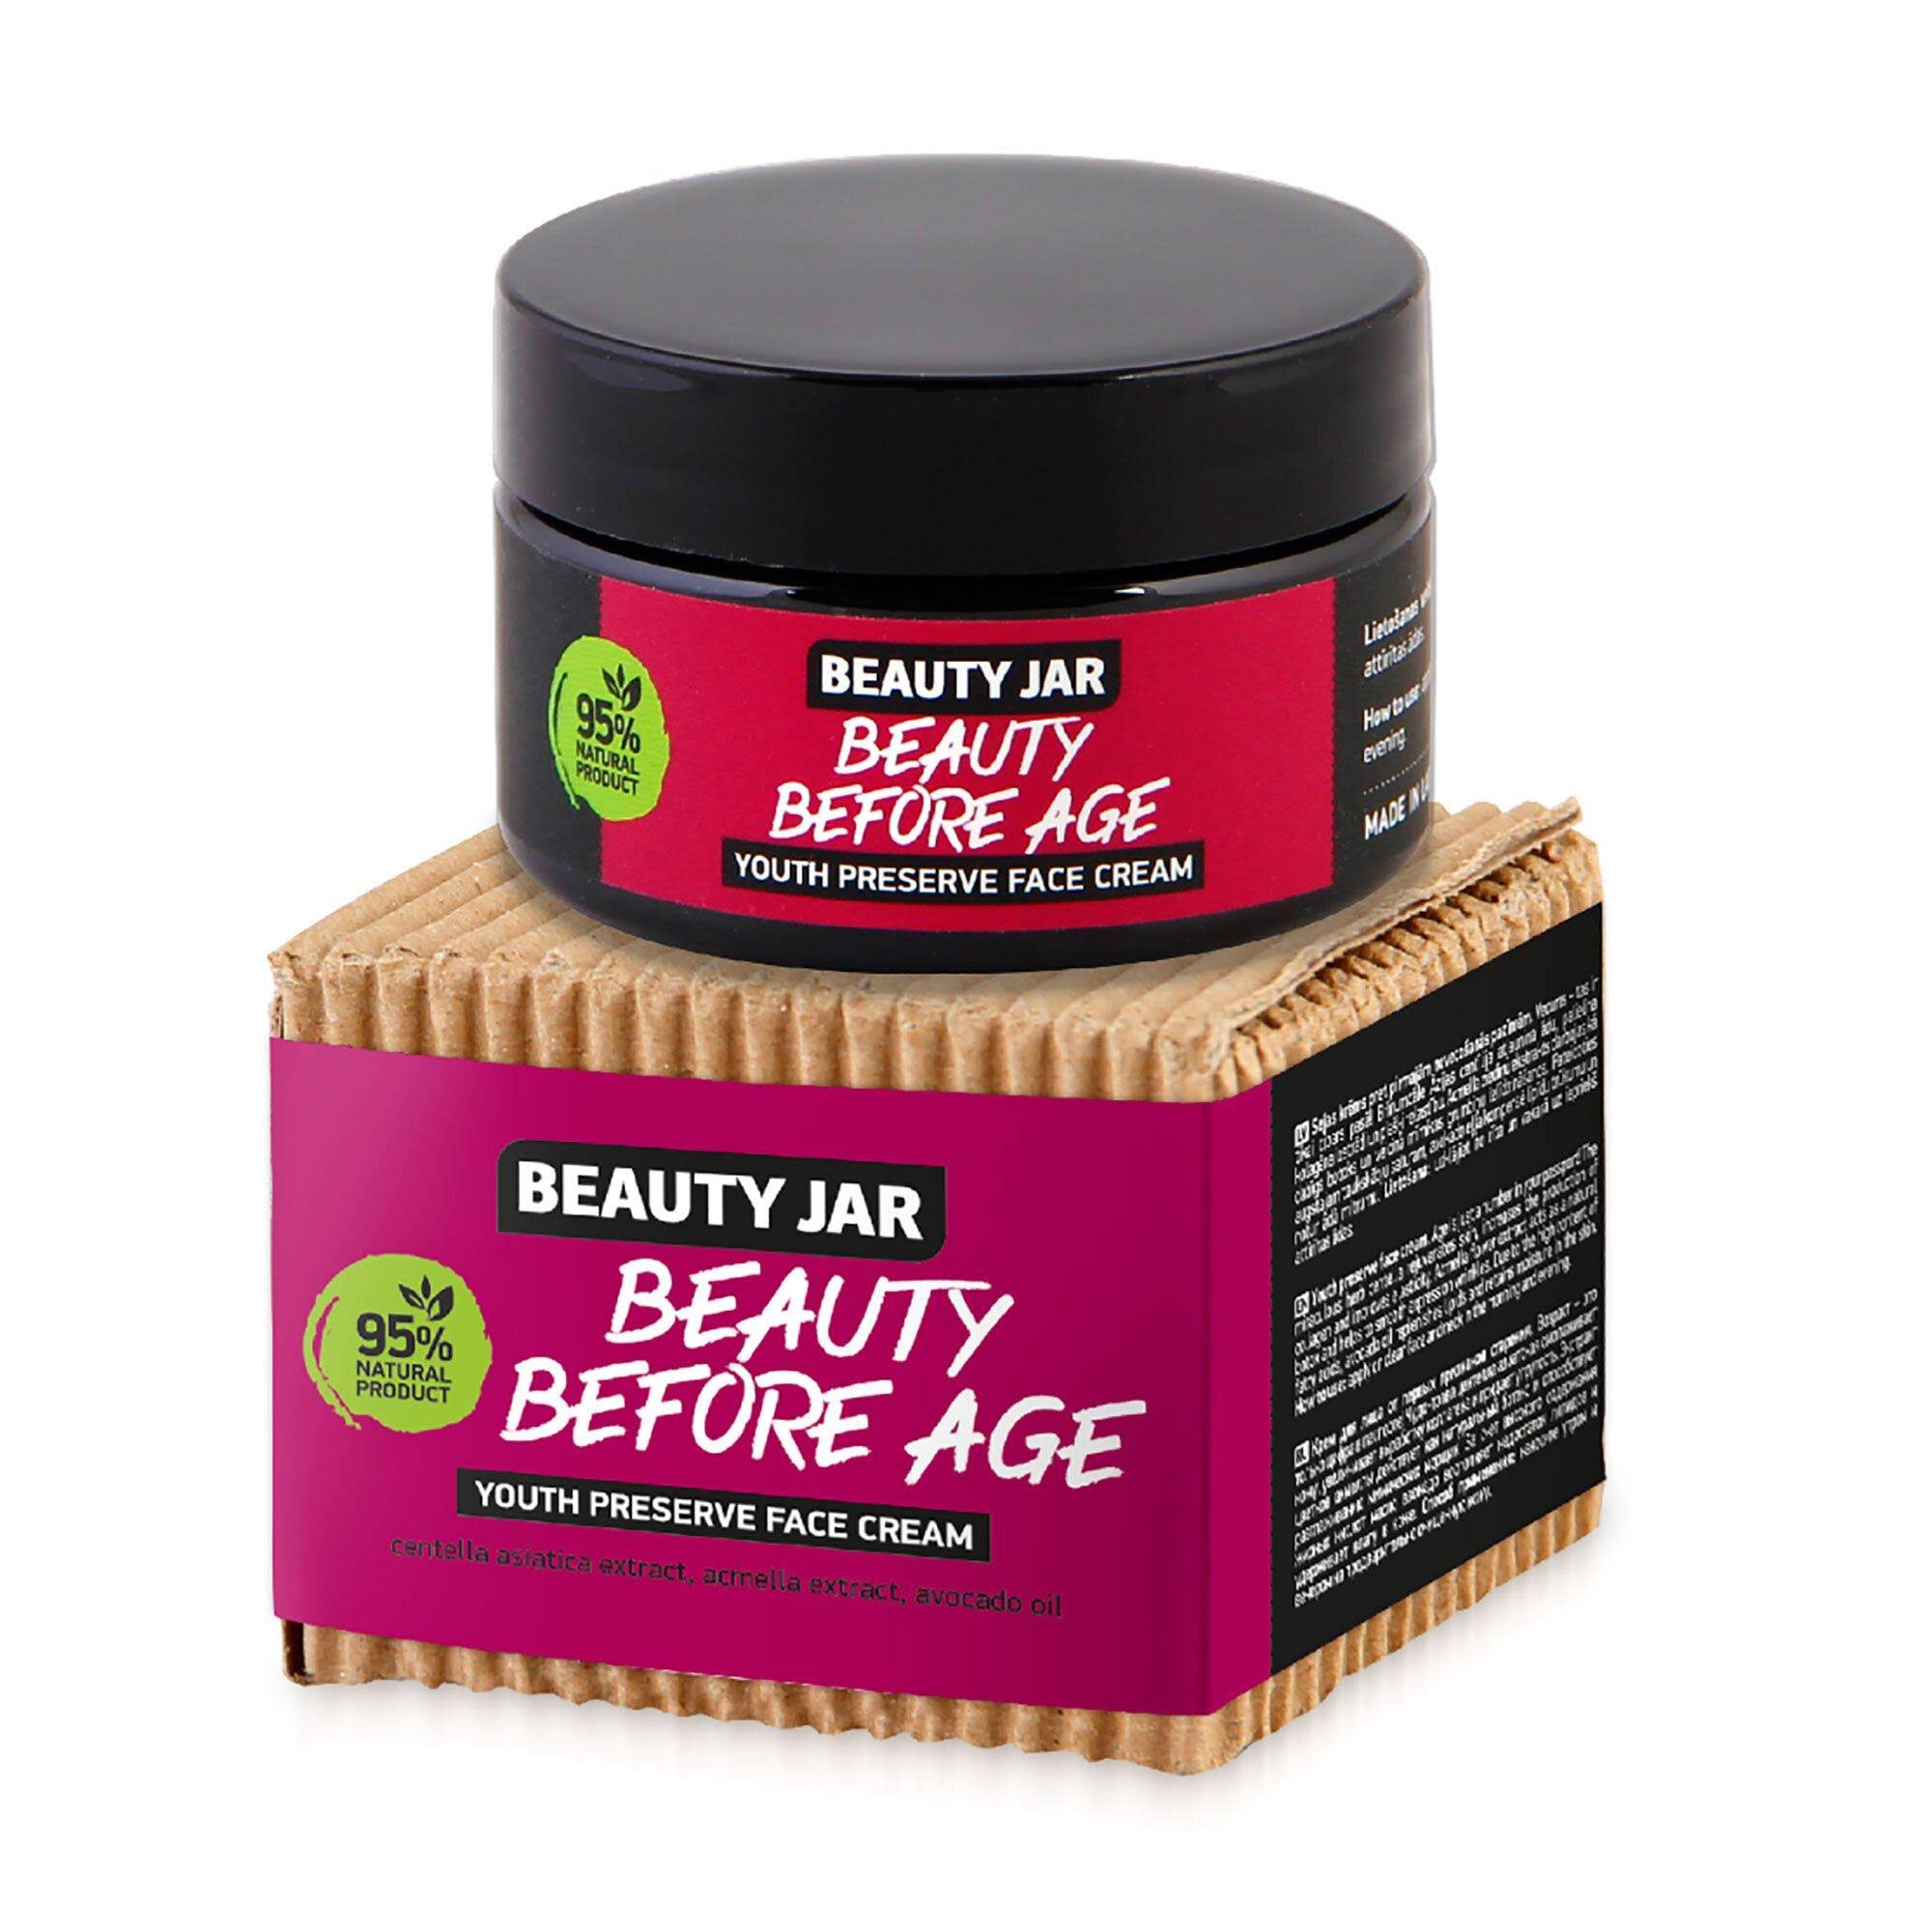 Anti-Aging Face Cream - Beauty Jar Beauty Before Age Youth Preserve Face Cream